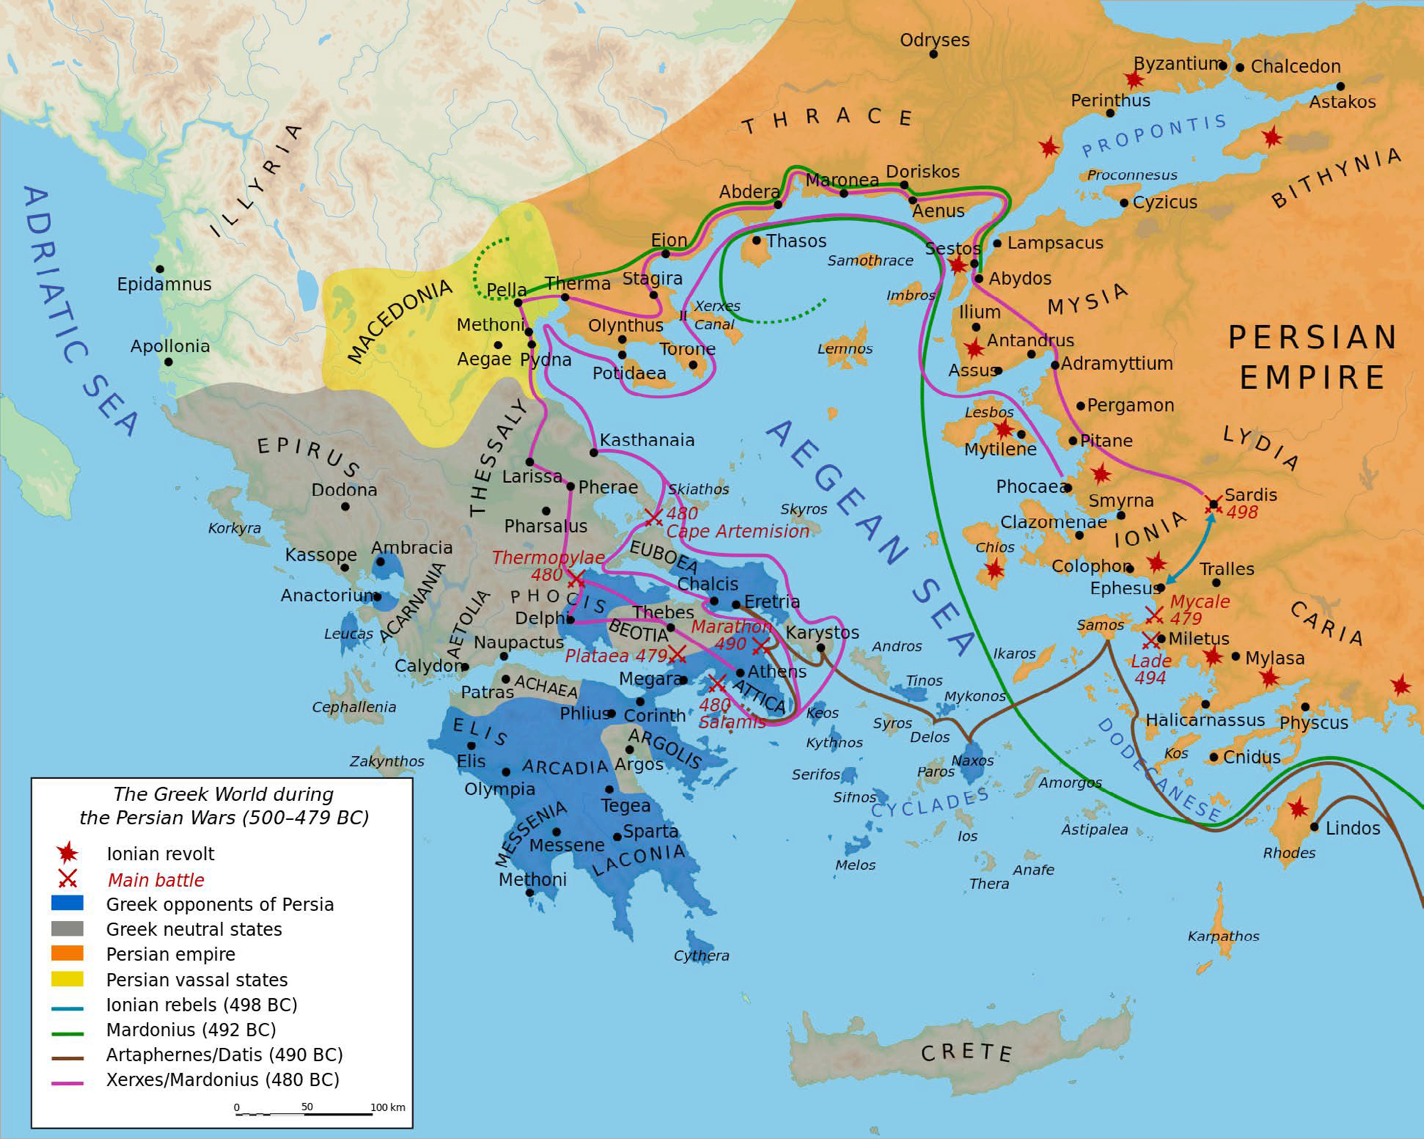 Map of the Greek World during the Persian Wars (500-479 BCE)